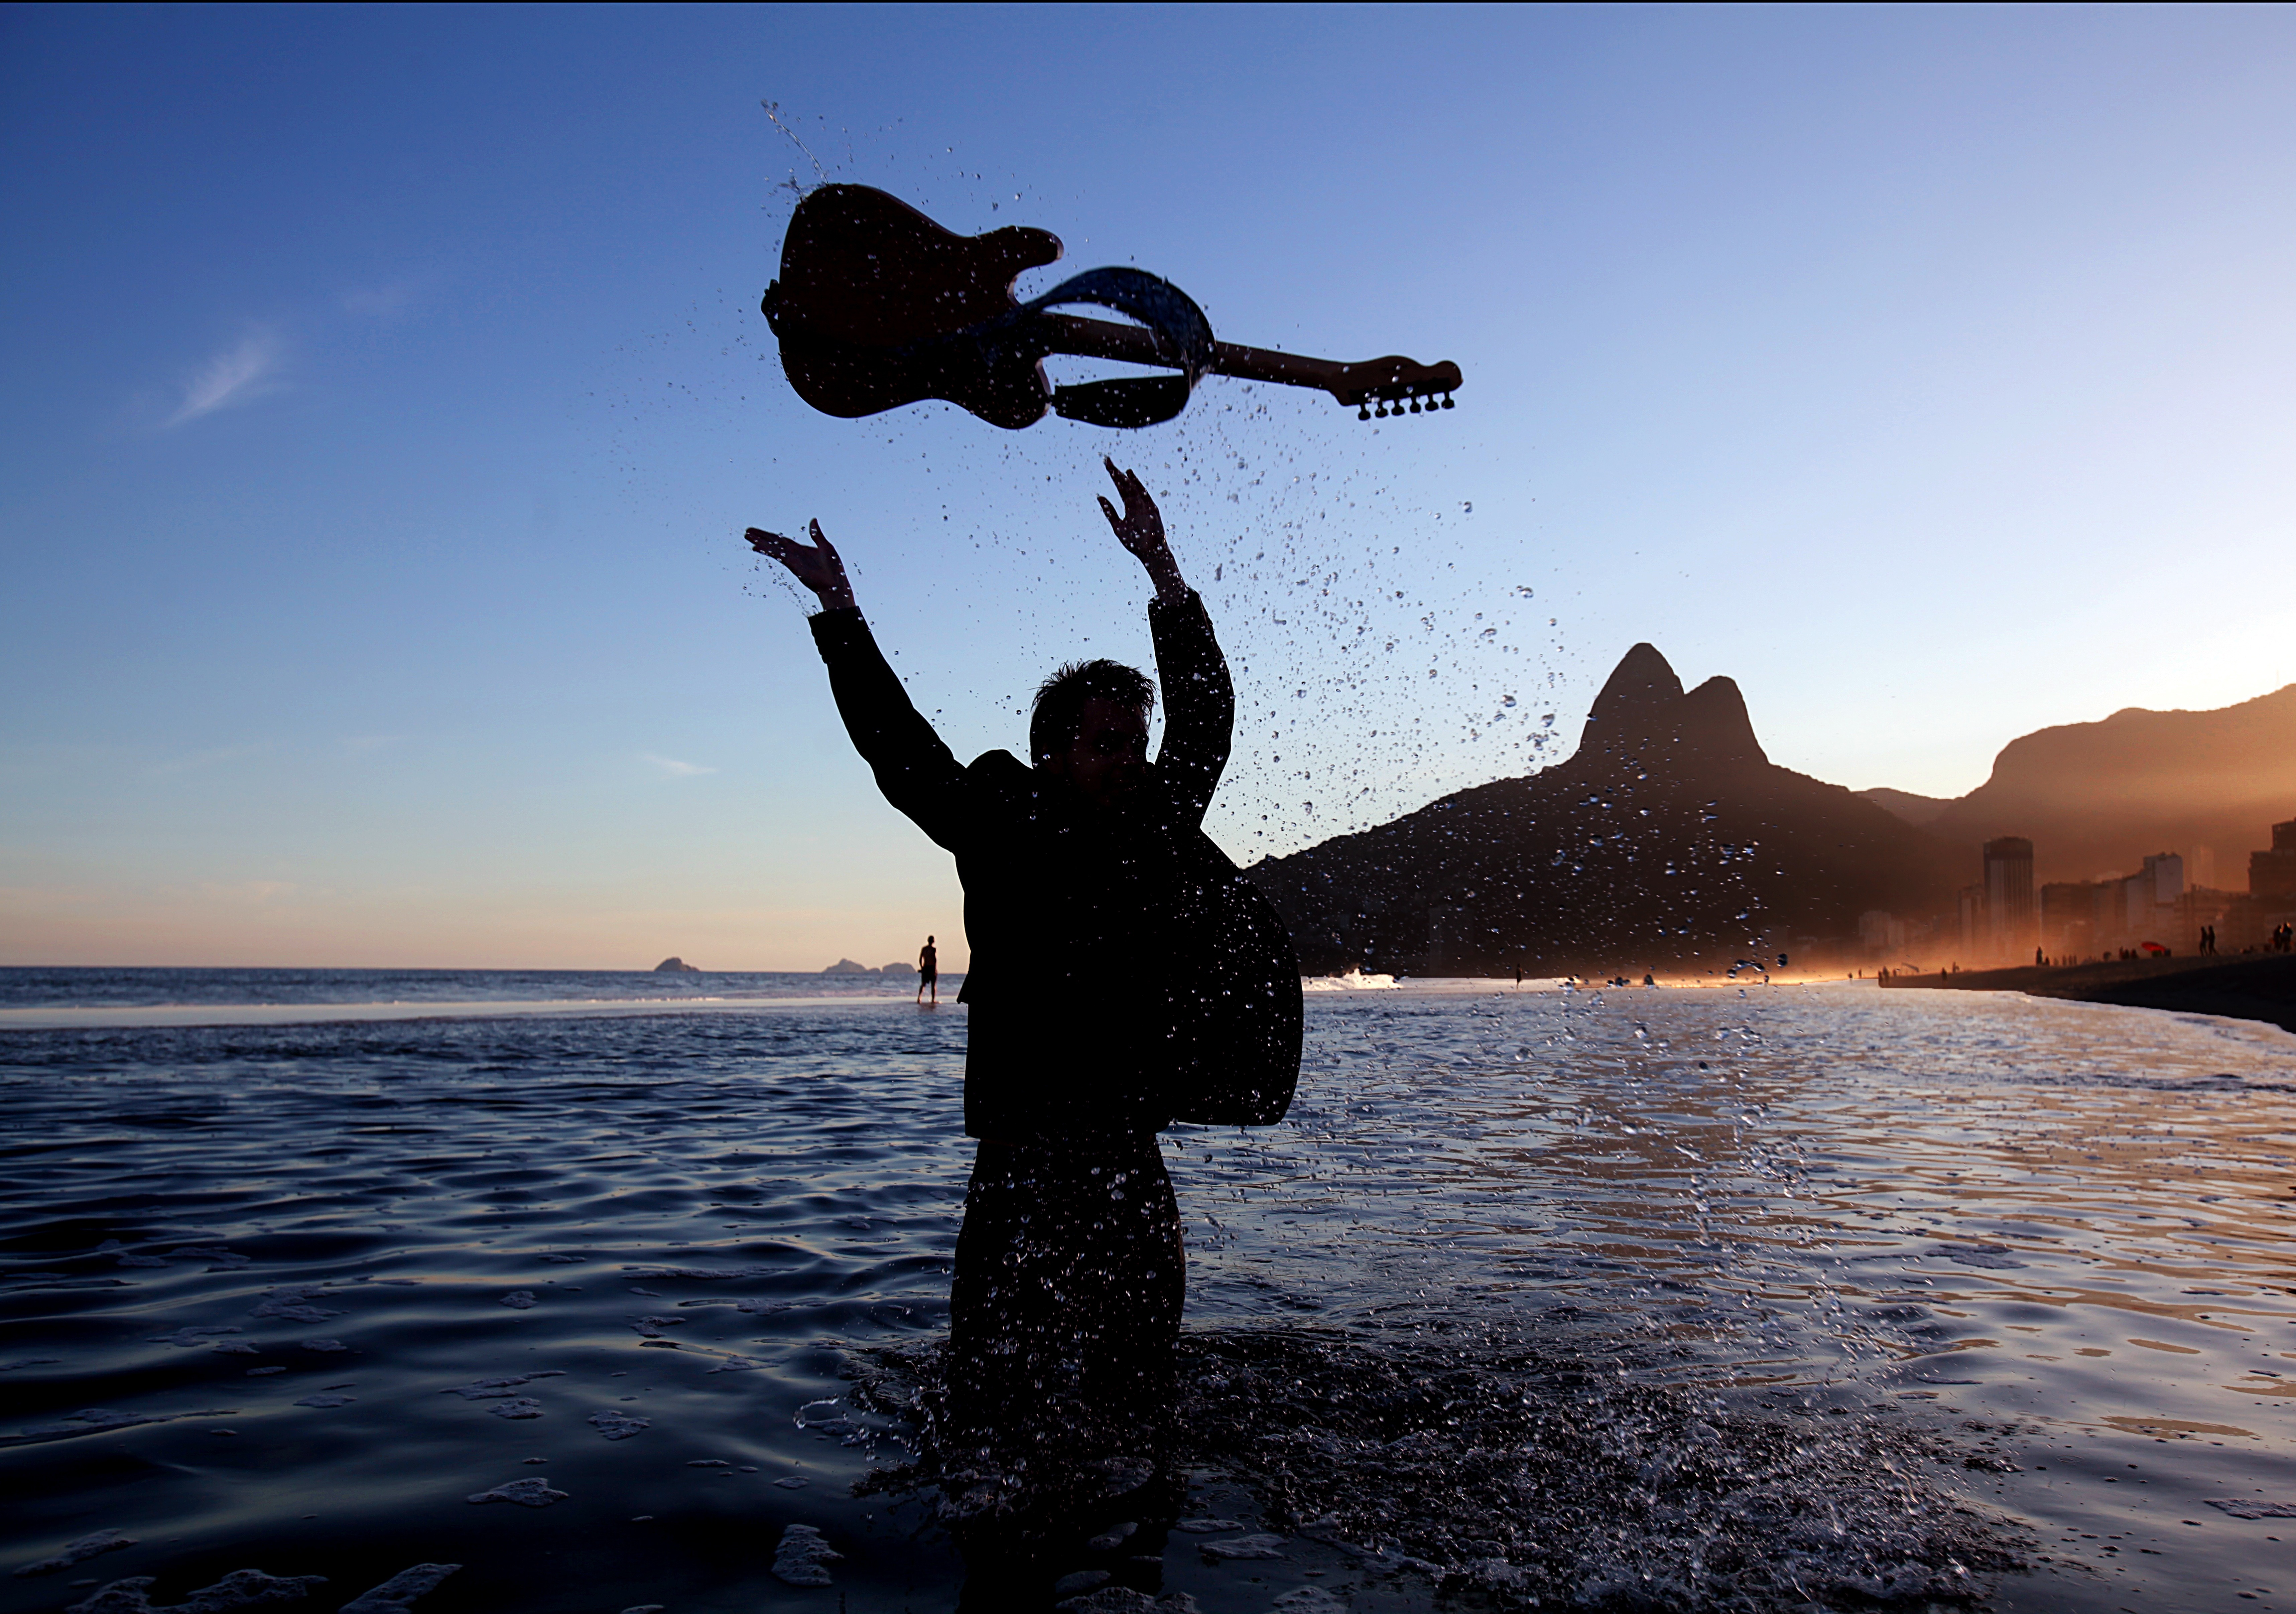 134725 download wallpaper music, sea, silhouette, spray, guitar, musical instrument, musician screensavers and pictures for free